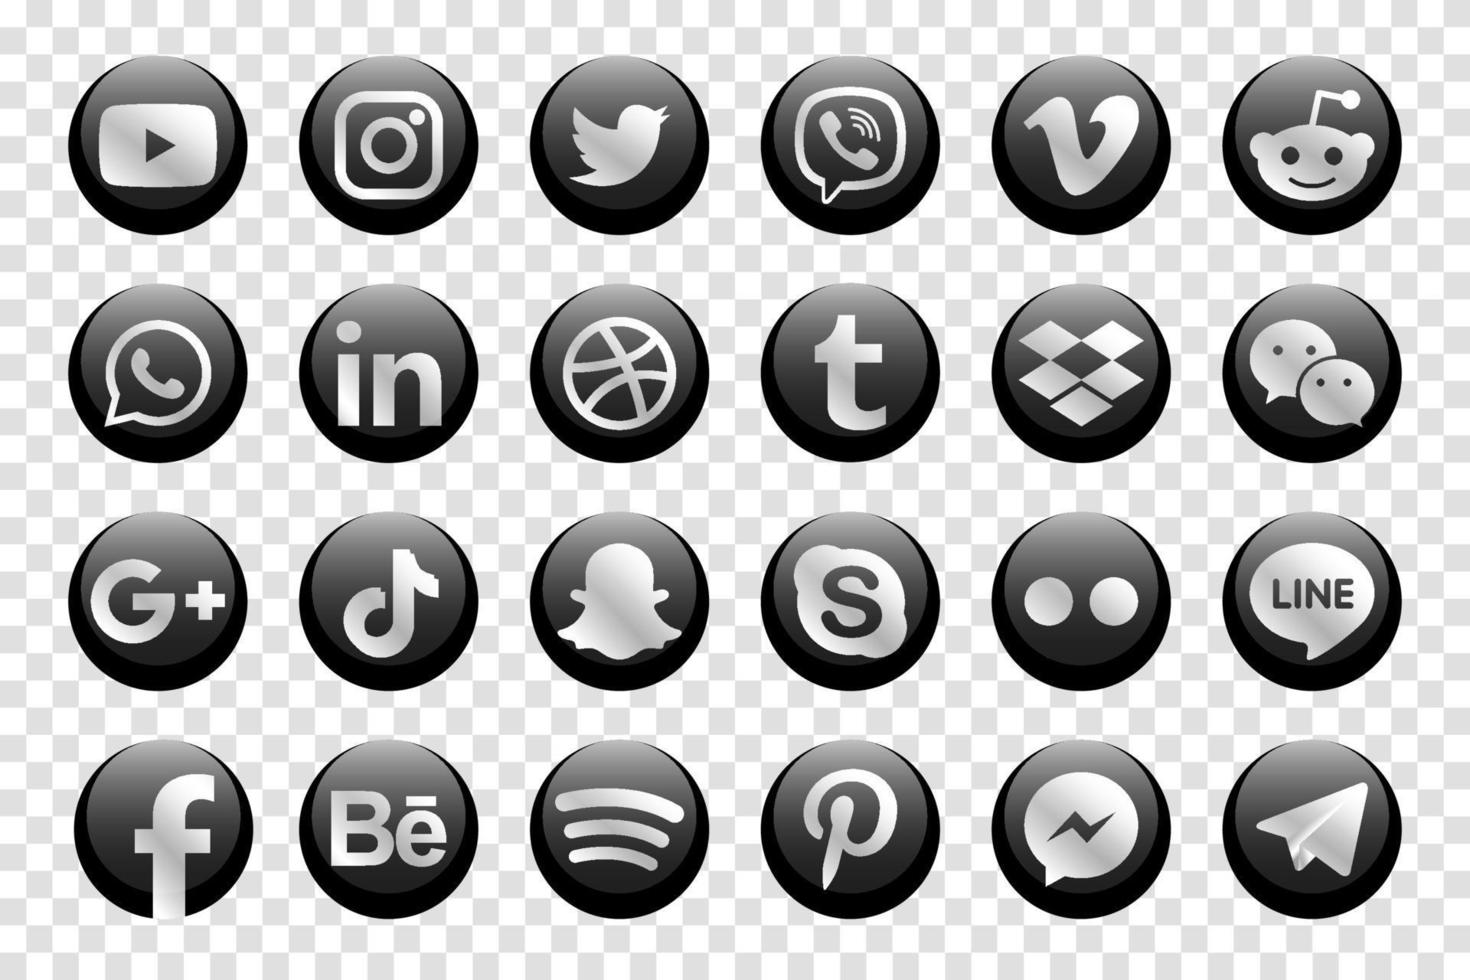 Silver Facebook, Instagram, Twitter, Youtube, WhatsApp, Dribble, Tiktok, Linkedin, Google plus, and many more silver collection of popular social media icons. vector